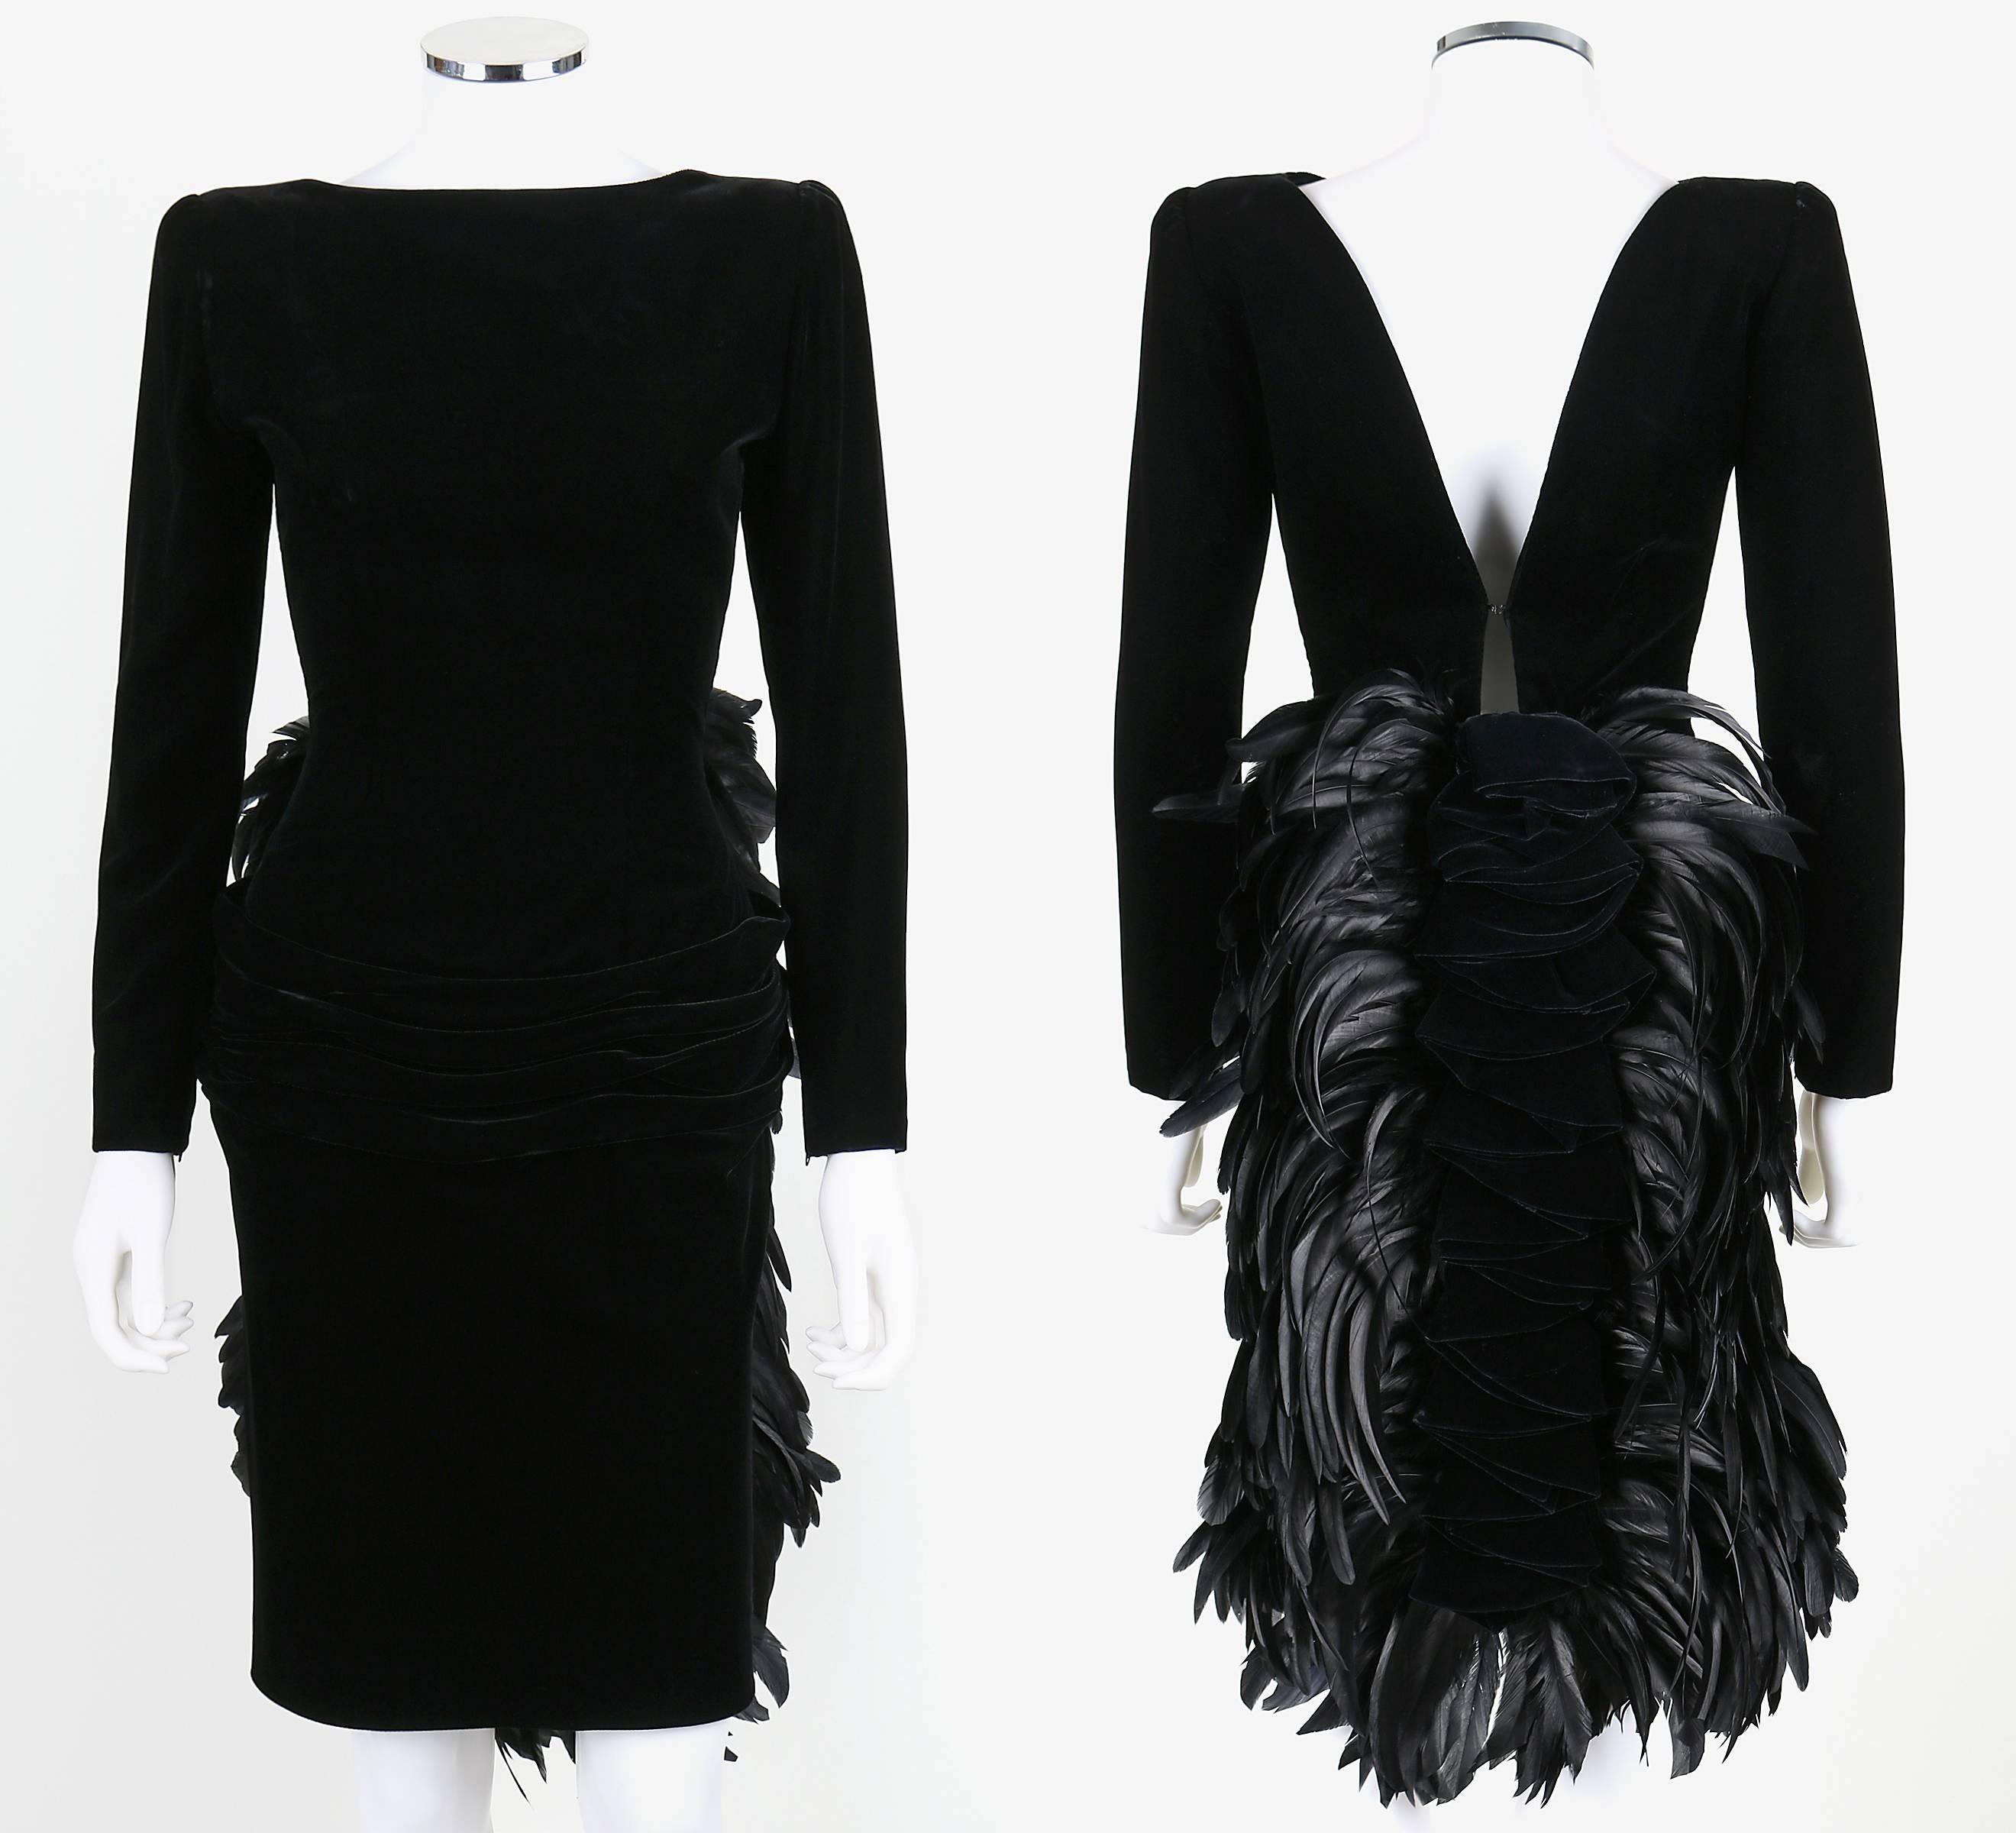 Vintage Oscar de la Renta cocktail dress from the Autumn/Winter 1987 collection. Plunging v-cut back. Back of skirt is embellished with a black coq feather and ruffled velvet bustle. Dress has long sleeves which zip at the cuffs. Padded shoulders.